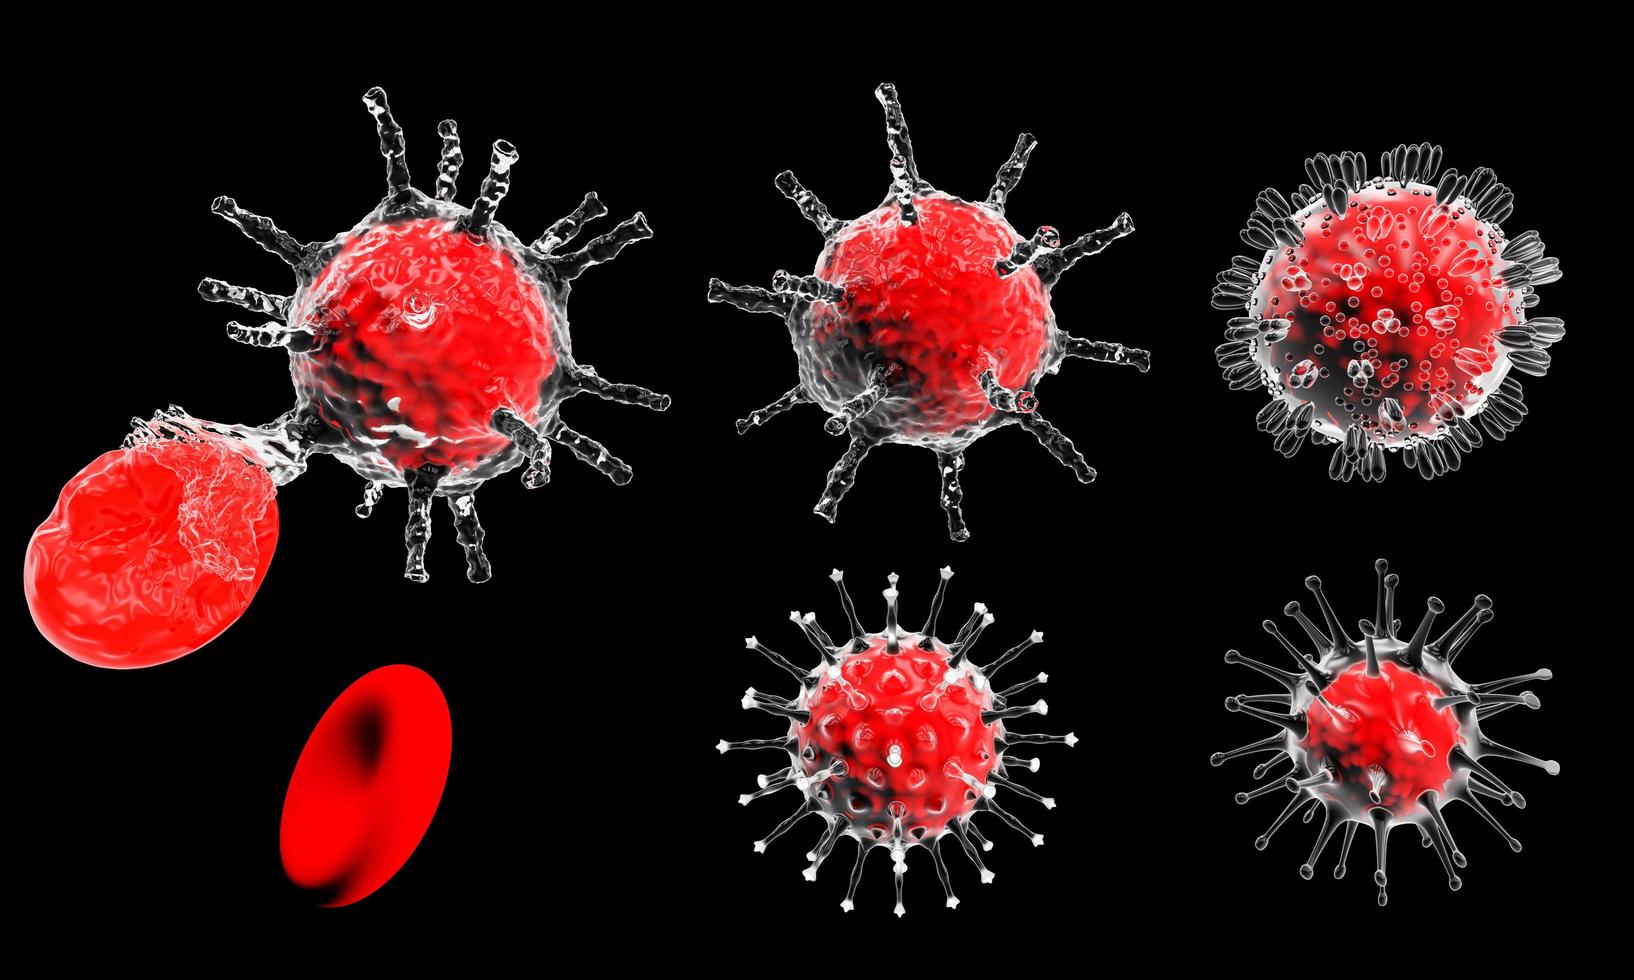 Model for Coronavirus Covid-19 outbreak and coronaviruses influenza concept  on a black background as dangerous flu strain cases as a pandemic medical health risk  with disease cell as a 3D render photo